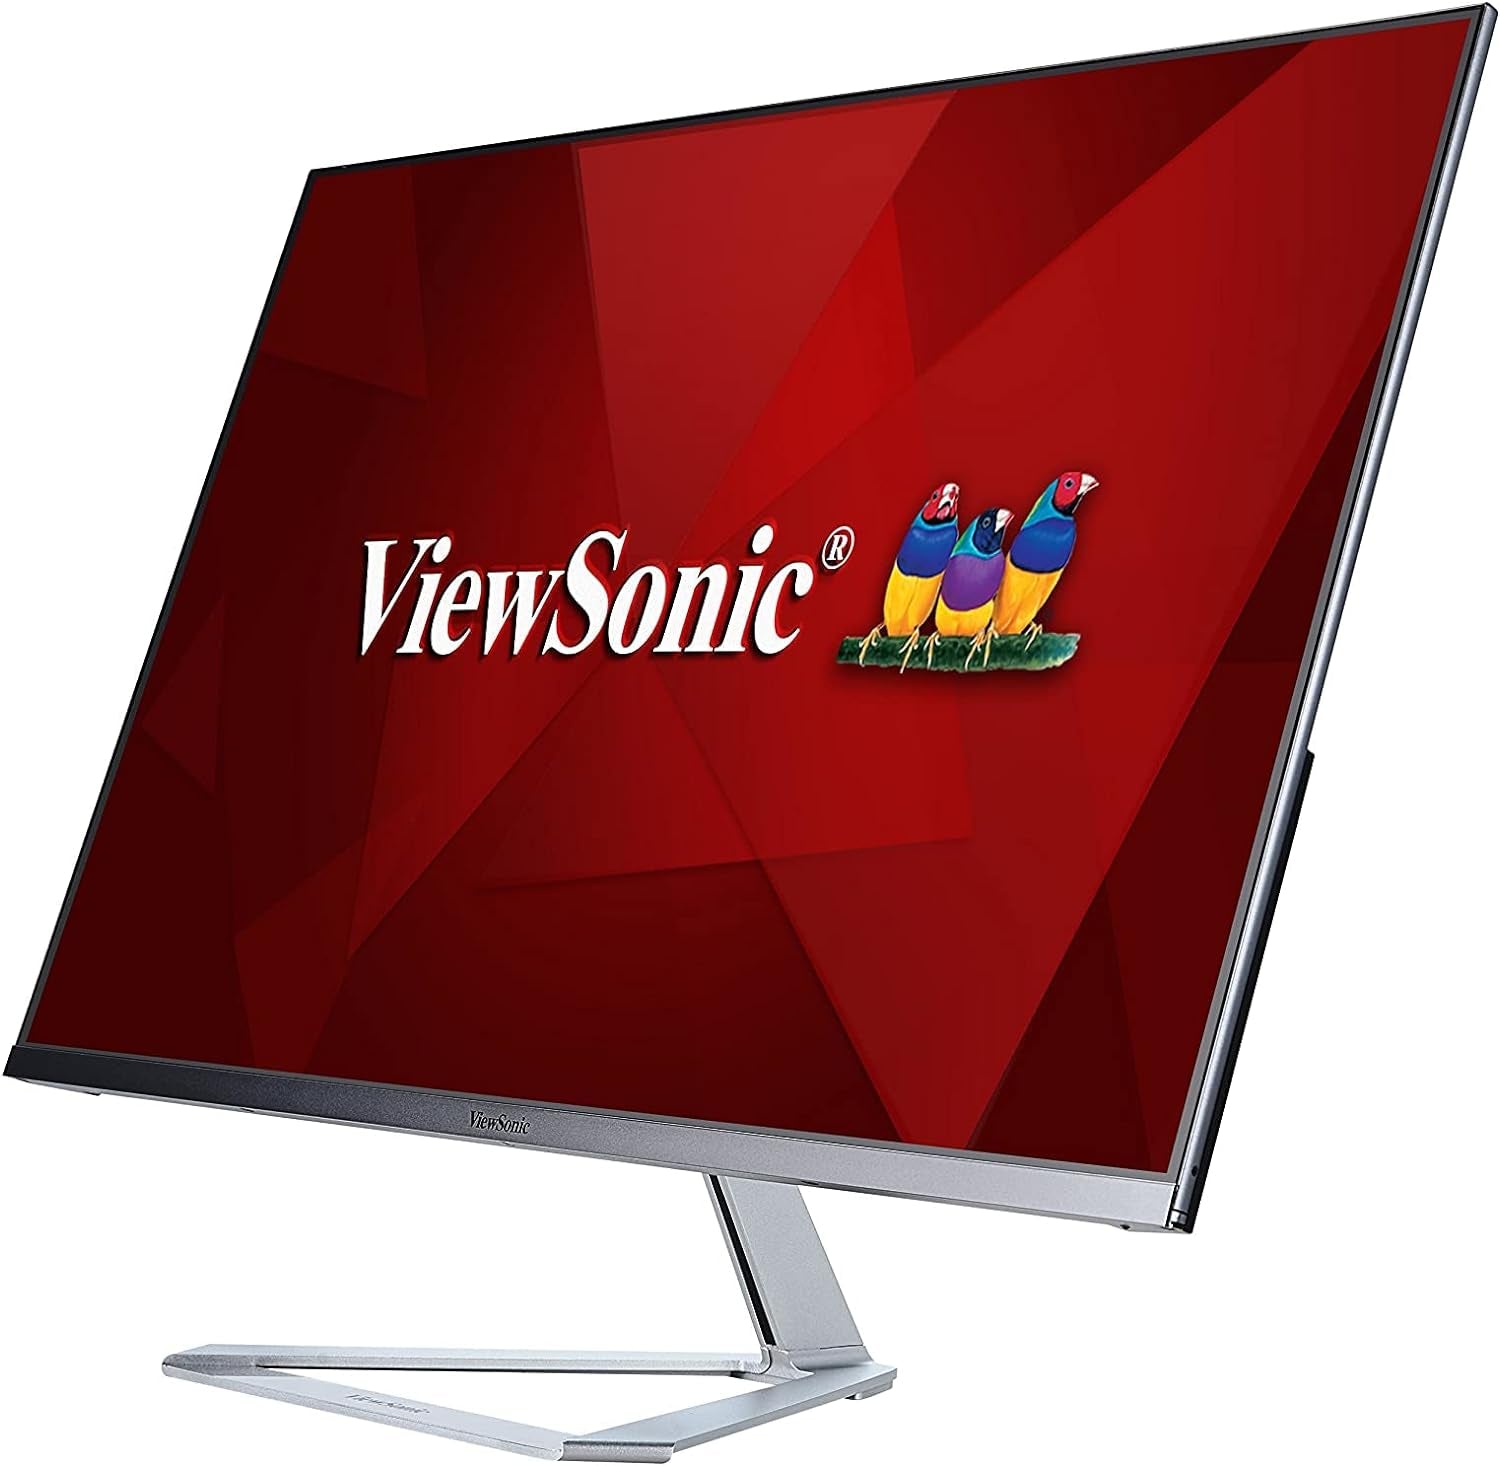 VX3276-2K-MHD 32 Inch IPS WQHD Monitor with 99% Srgb, 2X HDMI, Displayport, Mini Displayport, Eye Care for Work and Entertainment at Home, Silver/Black